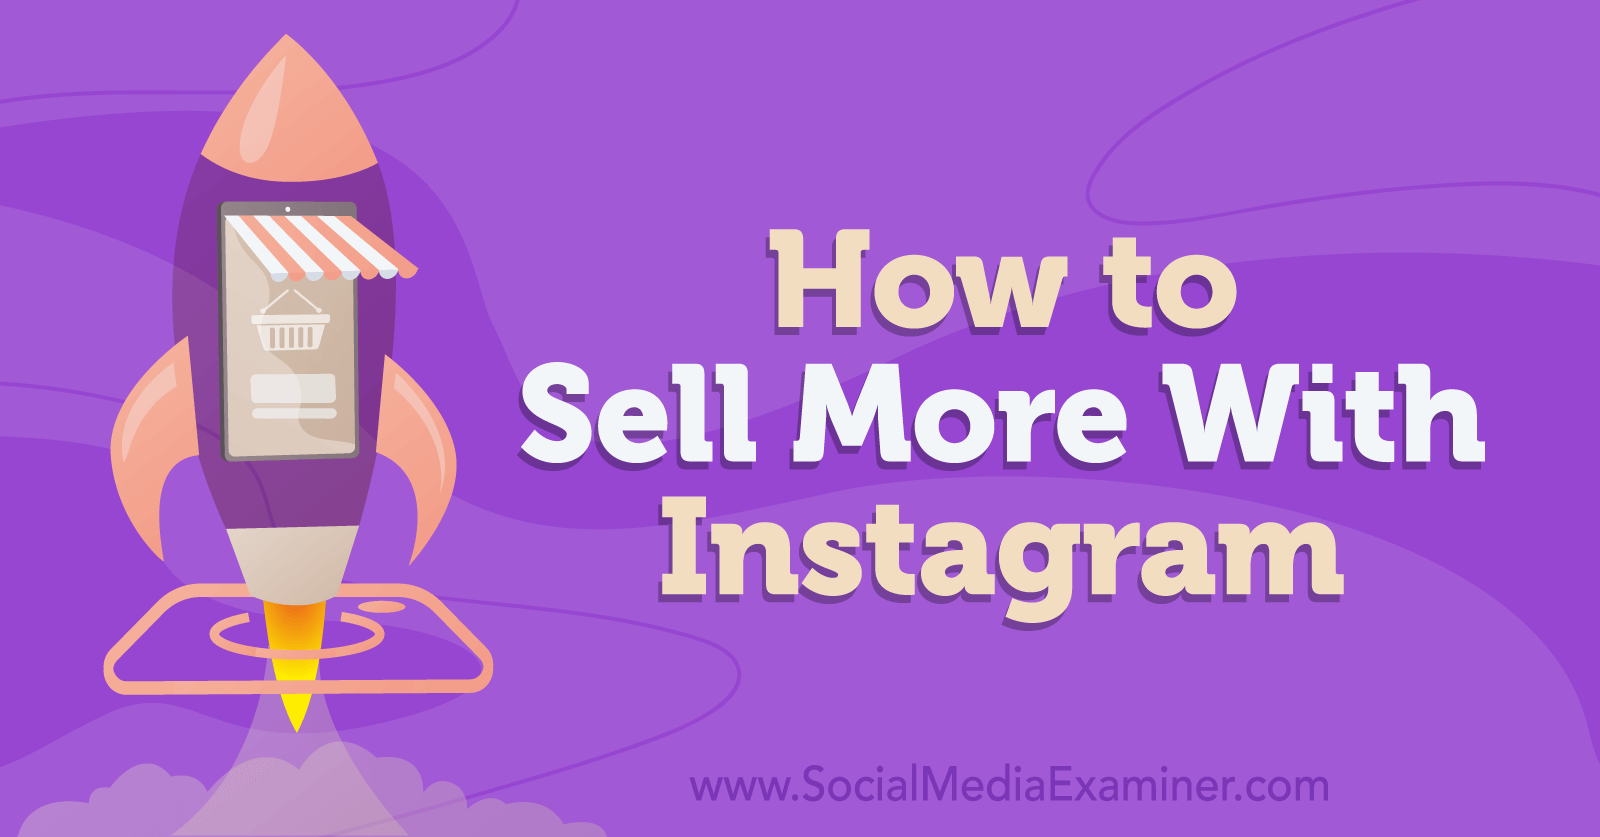 How to Sell More With Instagram-Social Media Examiner